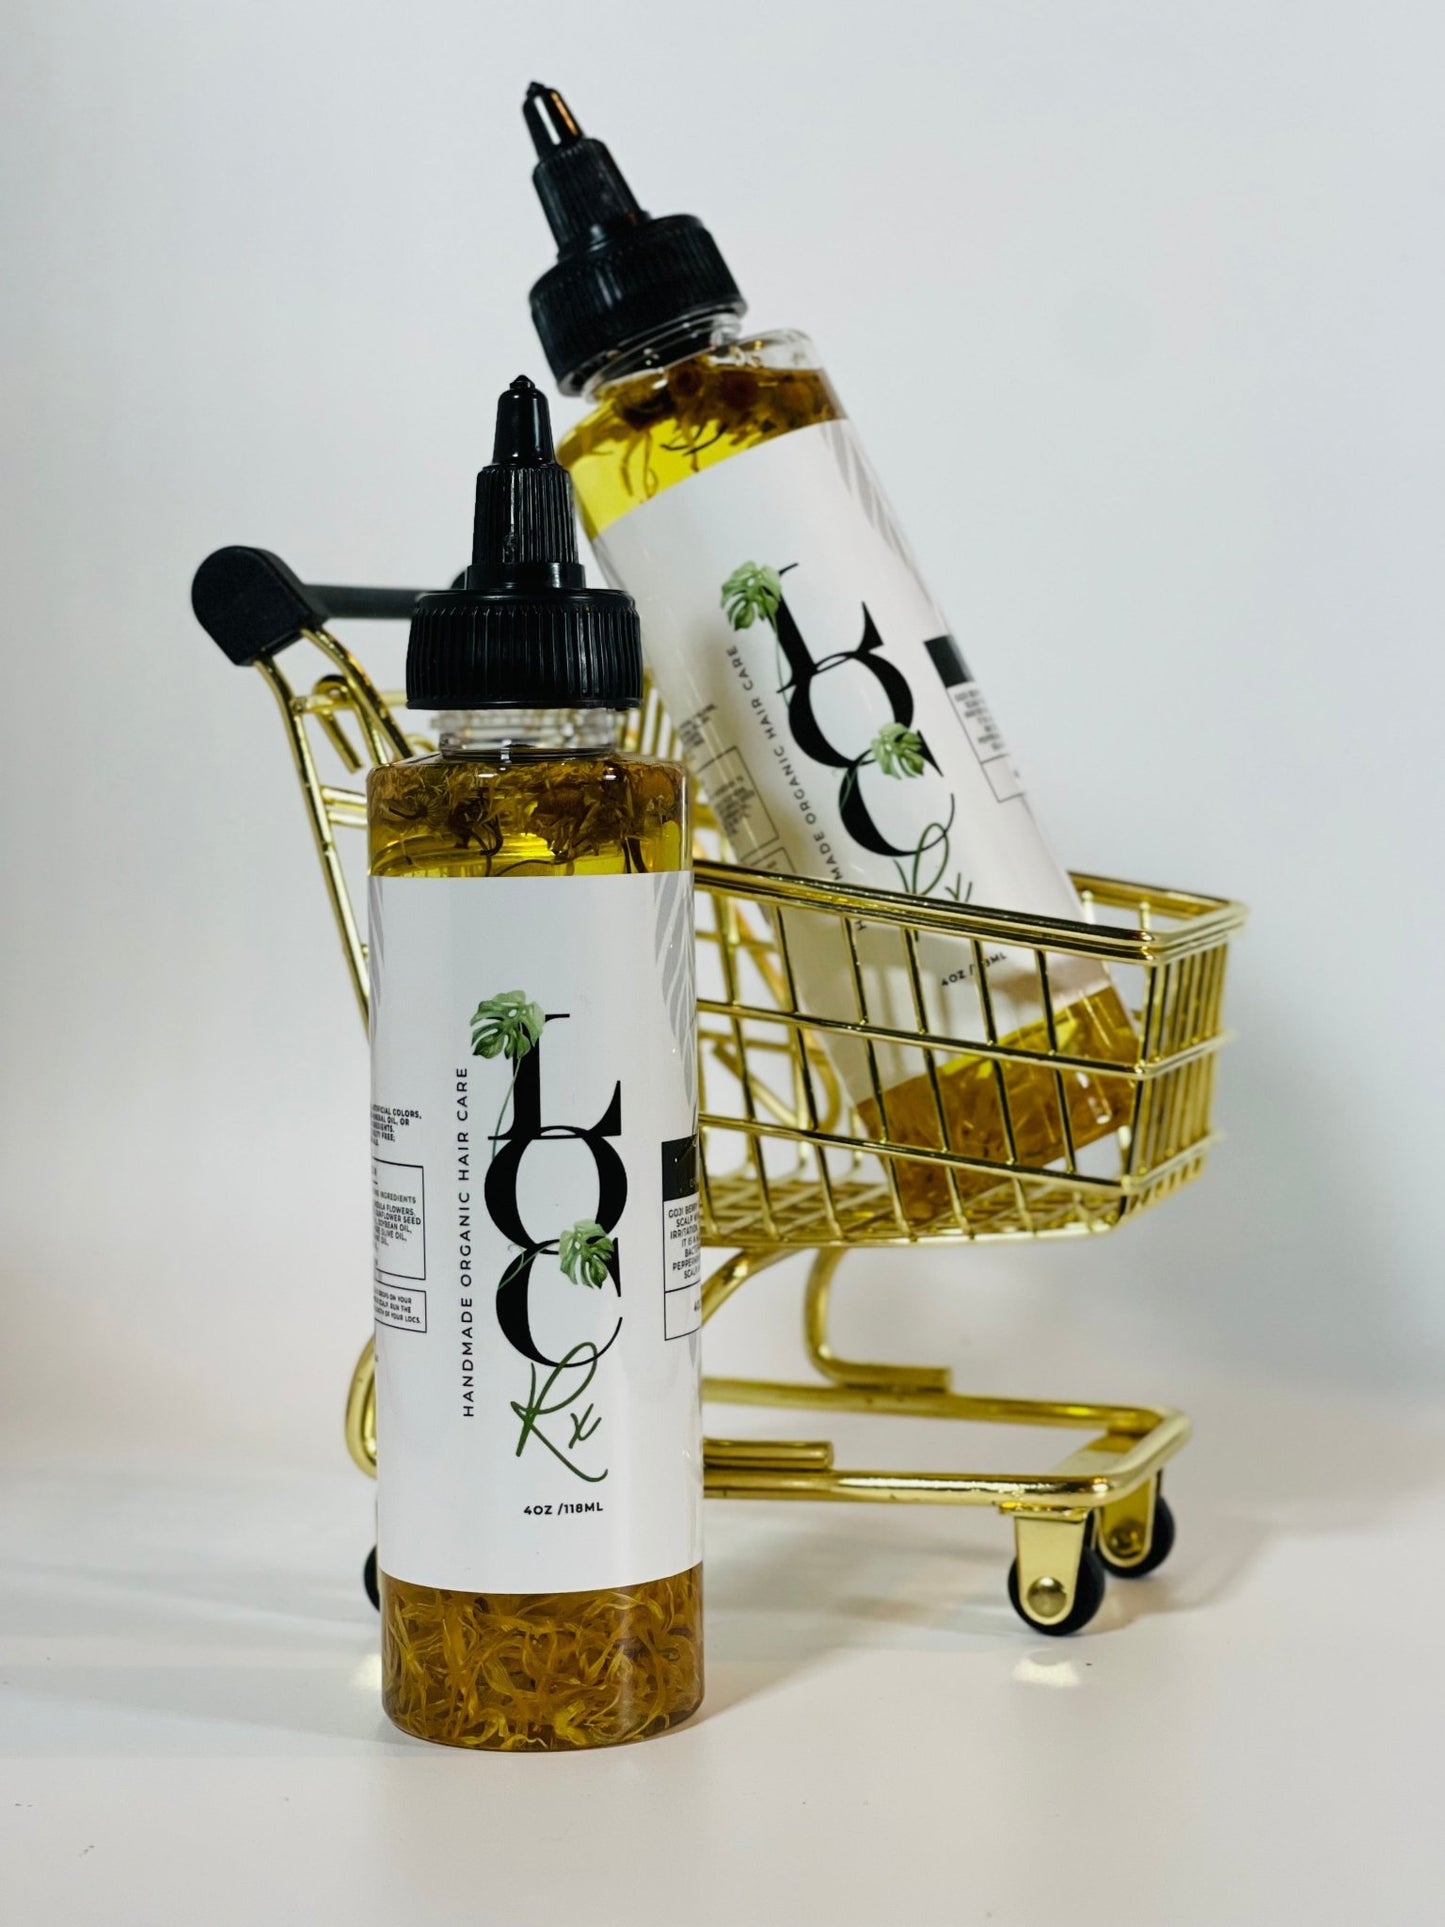 A bottle of 'Anti' Protective Anti-Itch Oil with a label that reads "soothes dry, itchy scalps and promotes a healthy scalp environment". Contains chamomile, goji berry, and calendula to hydrate dry scalps, remove dandruff, and prevent dryness and flakiness. Suitable for all hair types and textures, especially for locs, loose natural hair, braids, and protective styles.